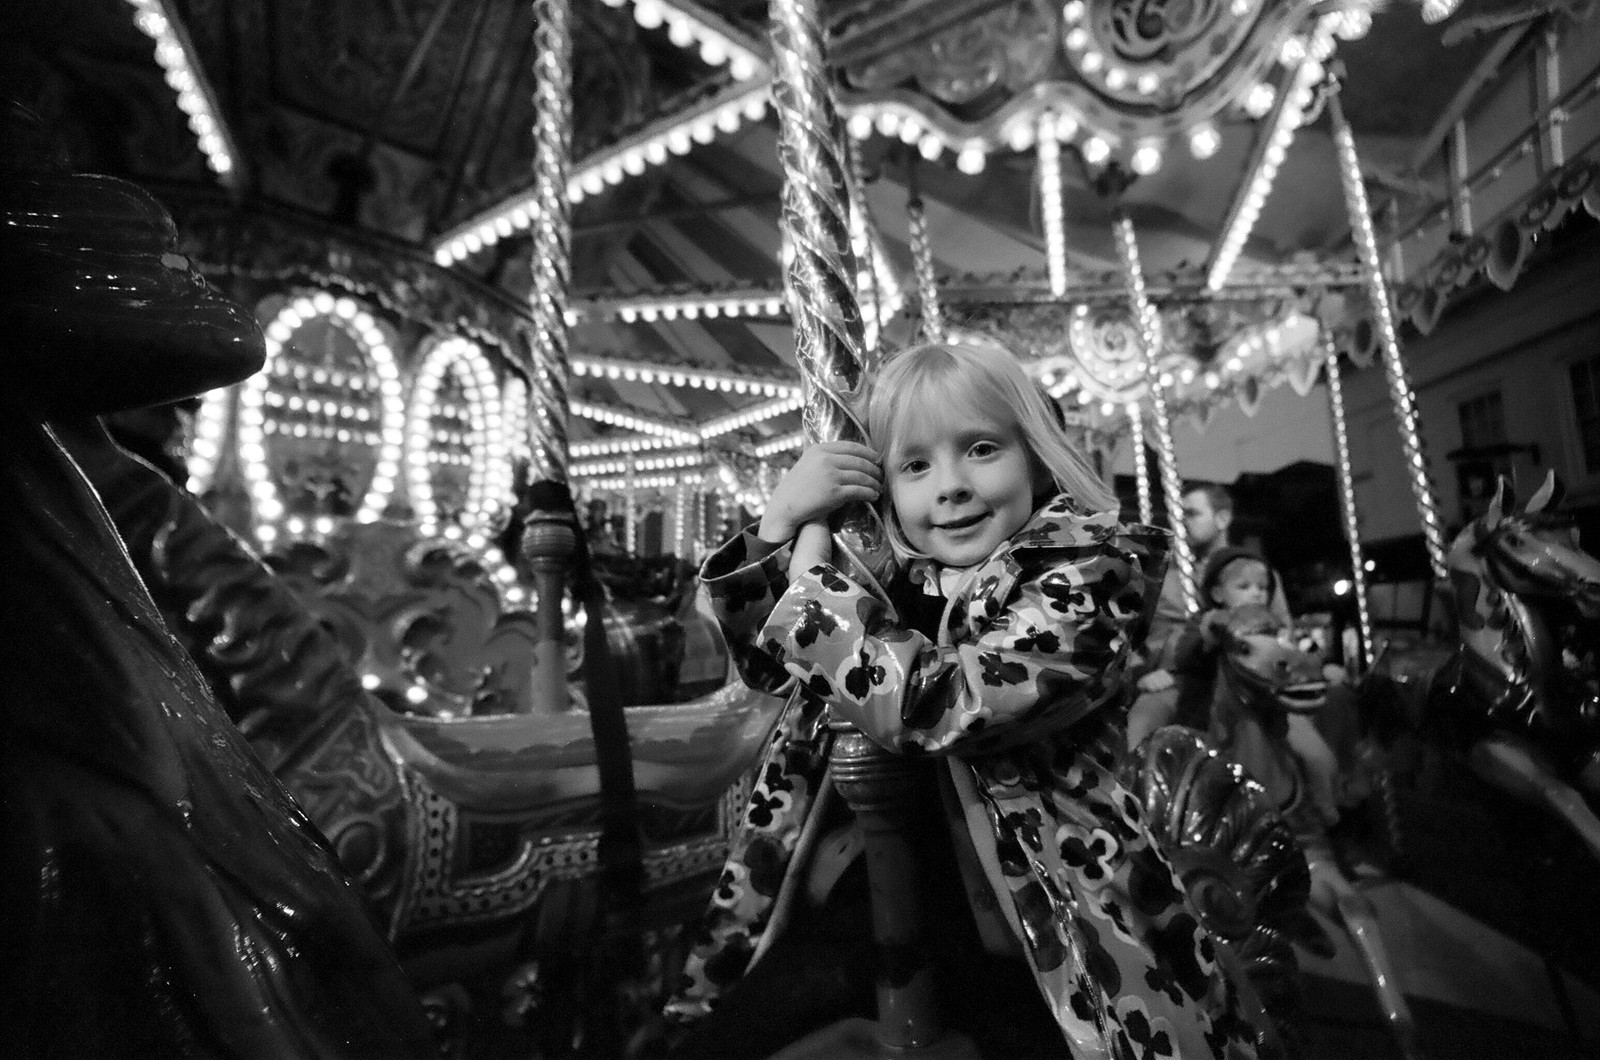 Xmas Fayre with a Lomo LC-Wide